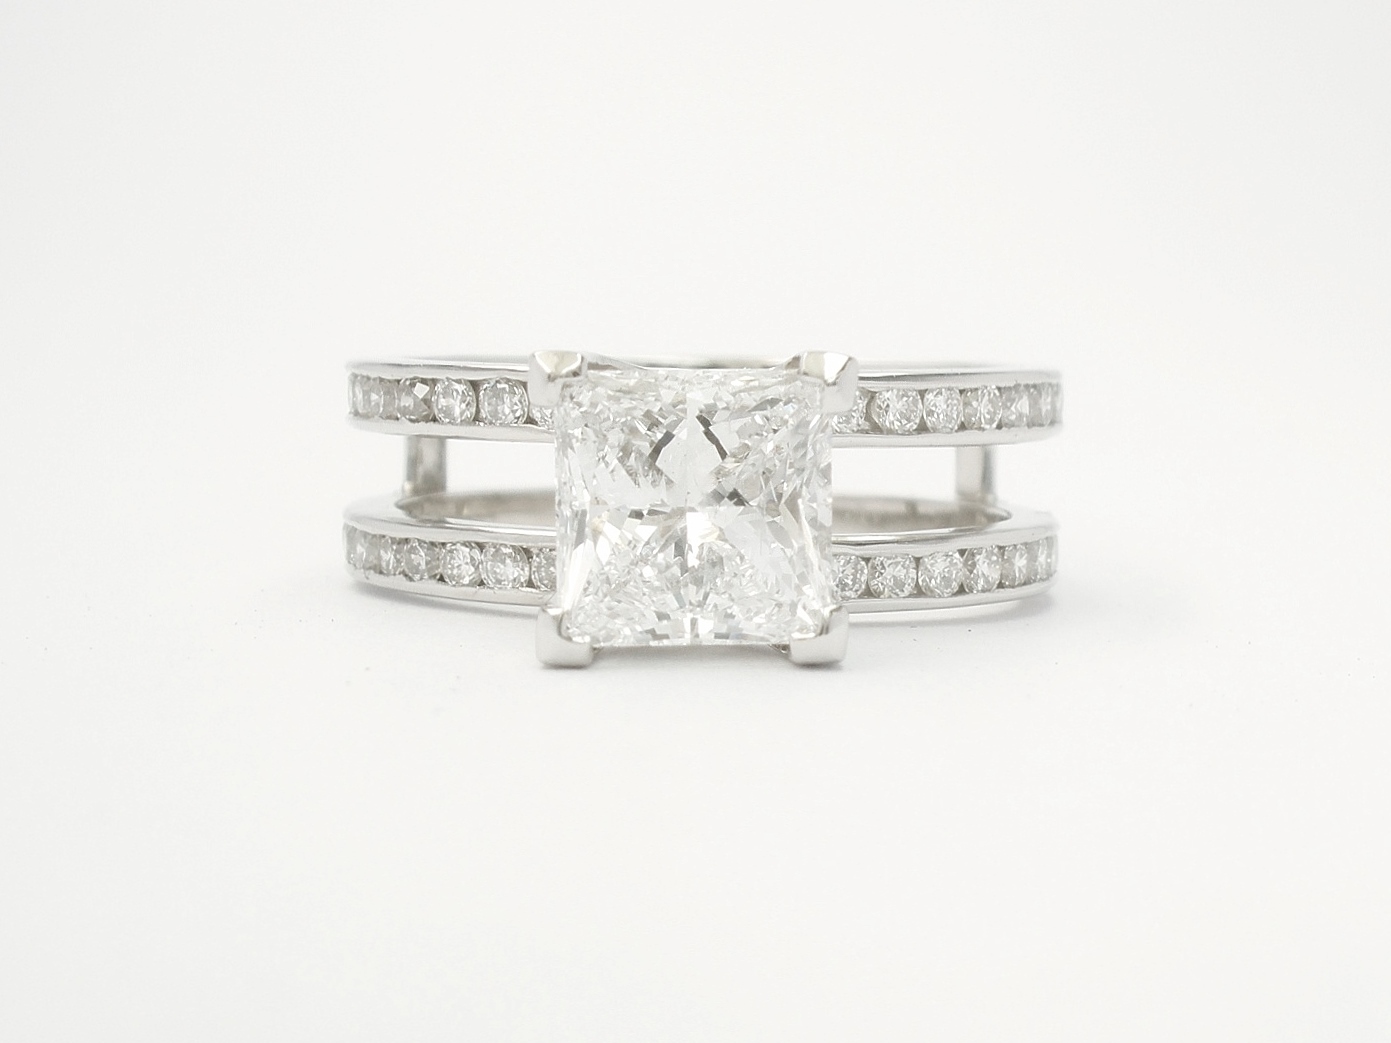 Single stone 1.19ct.'D' colour princess cut diamond 'Embrace' ring set in platinum with round brilliant cut diamonds set in twin shanks. View with wedding ring in shaped wedding ring